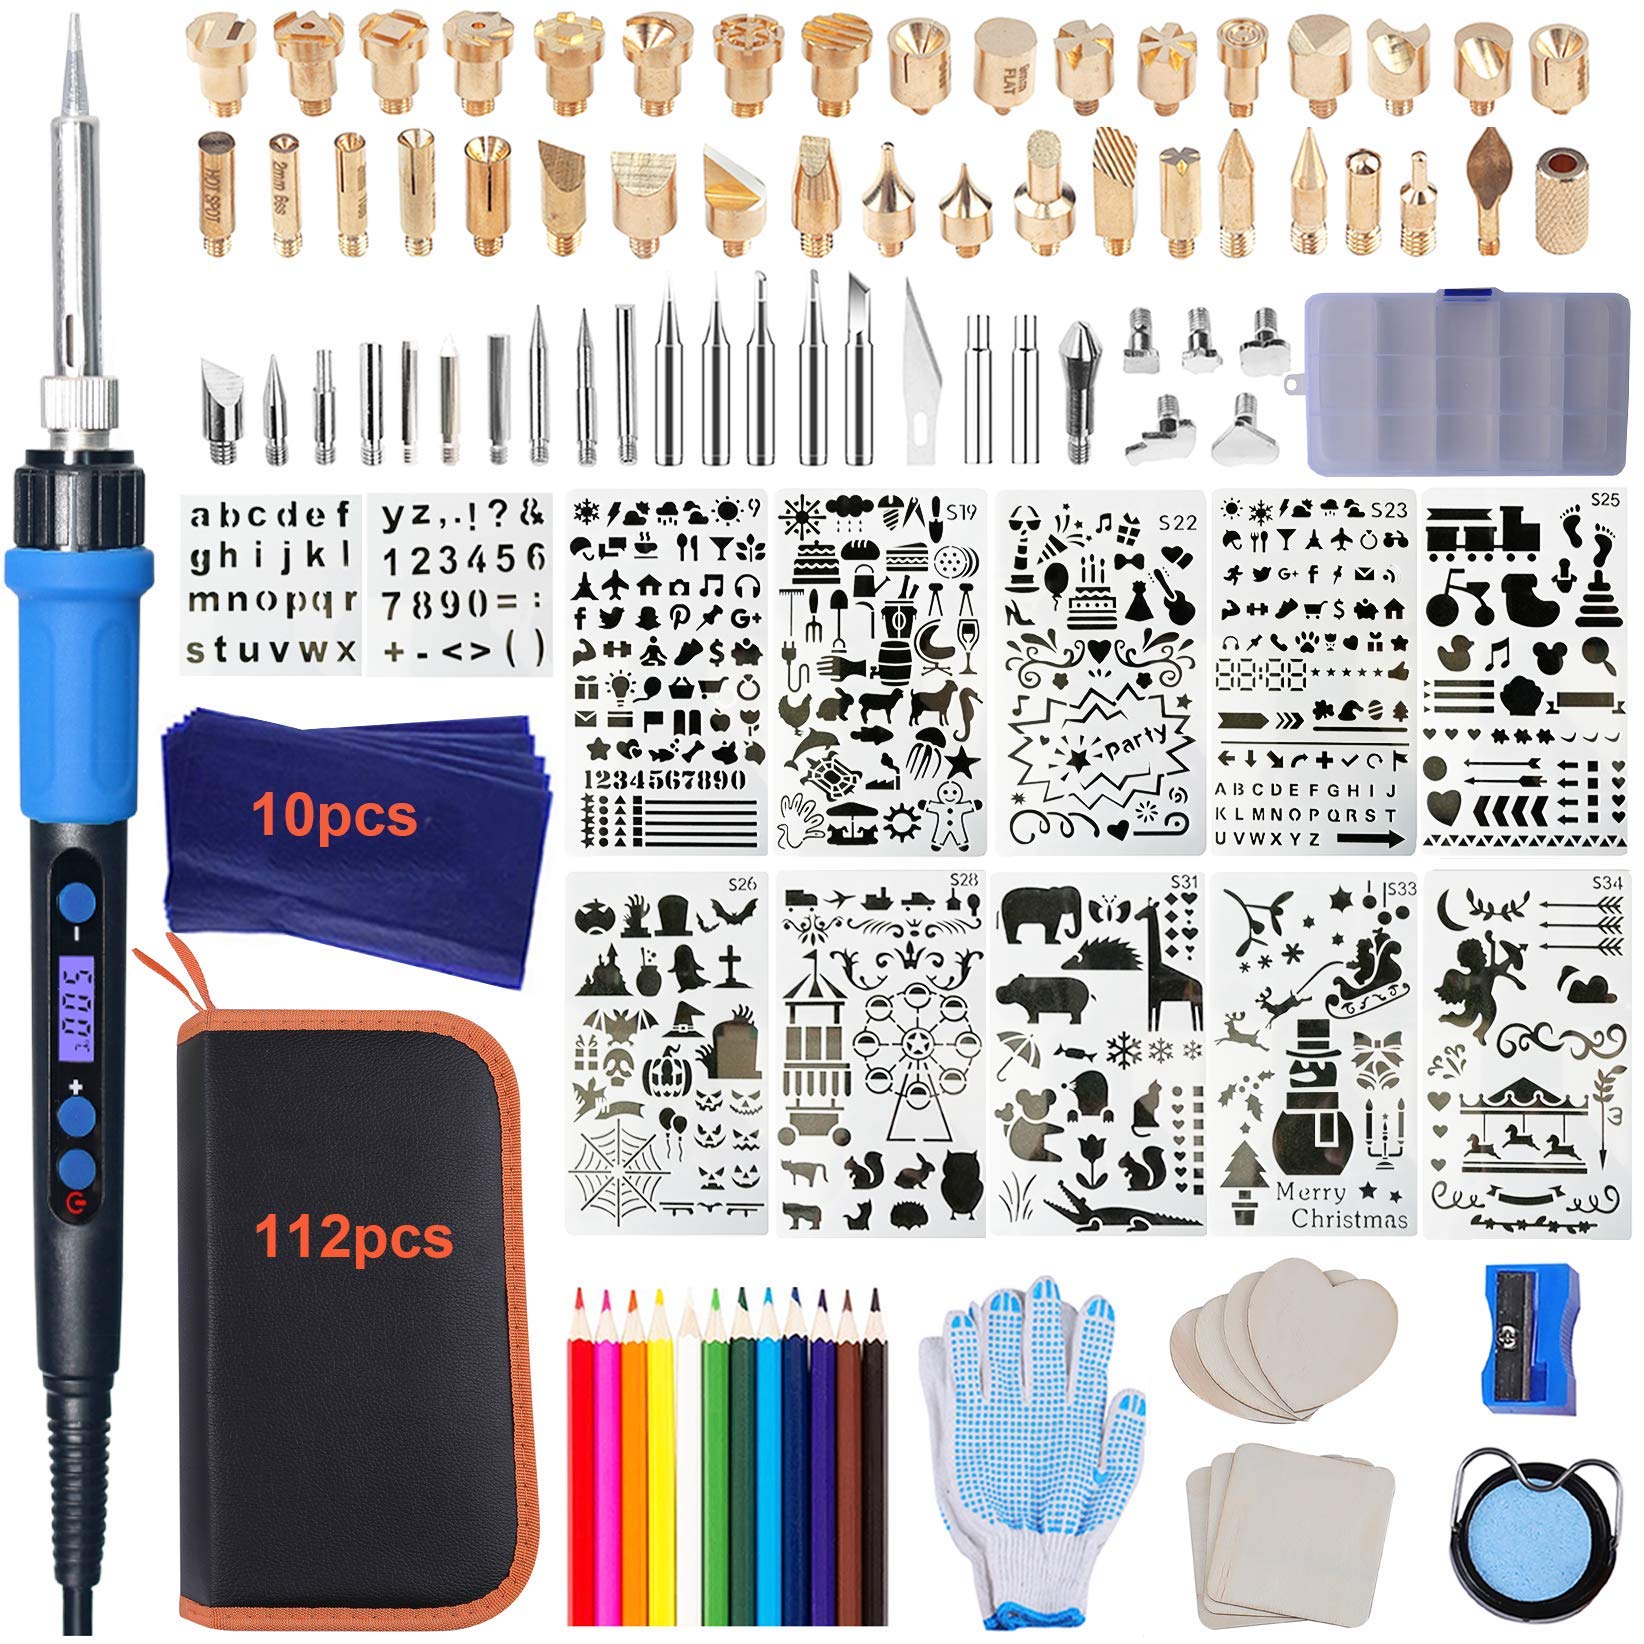 112pcs Calegency Wood Burning Kit-Wood Burning Tool Set with Digital LCD Display Pyrography Pen Adjustable Temperature and Embossing/Carving